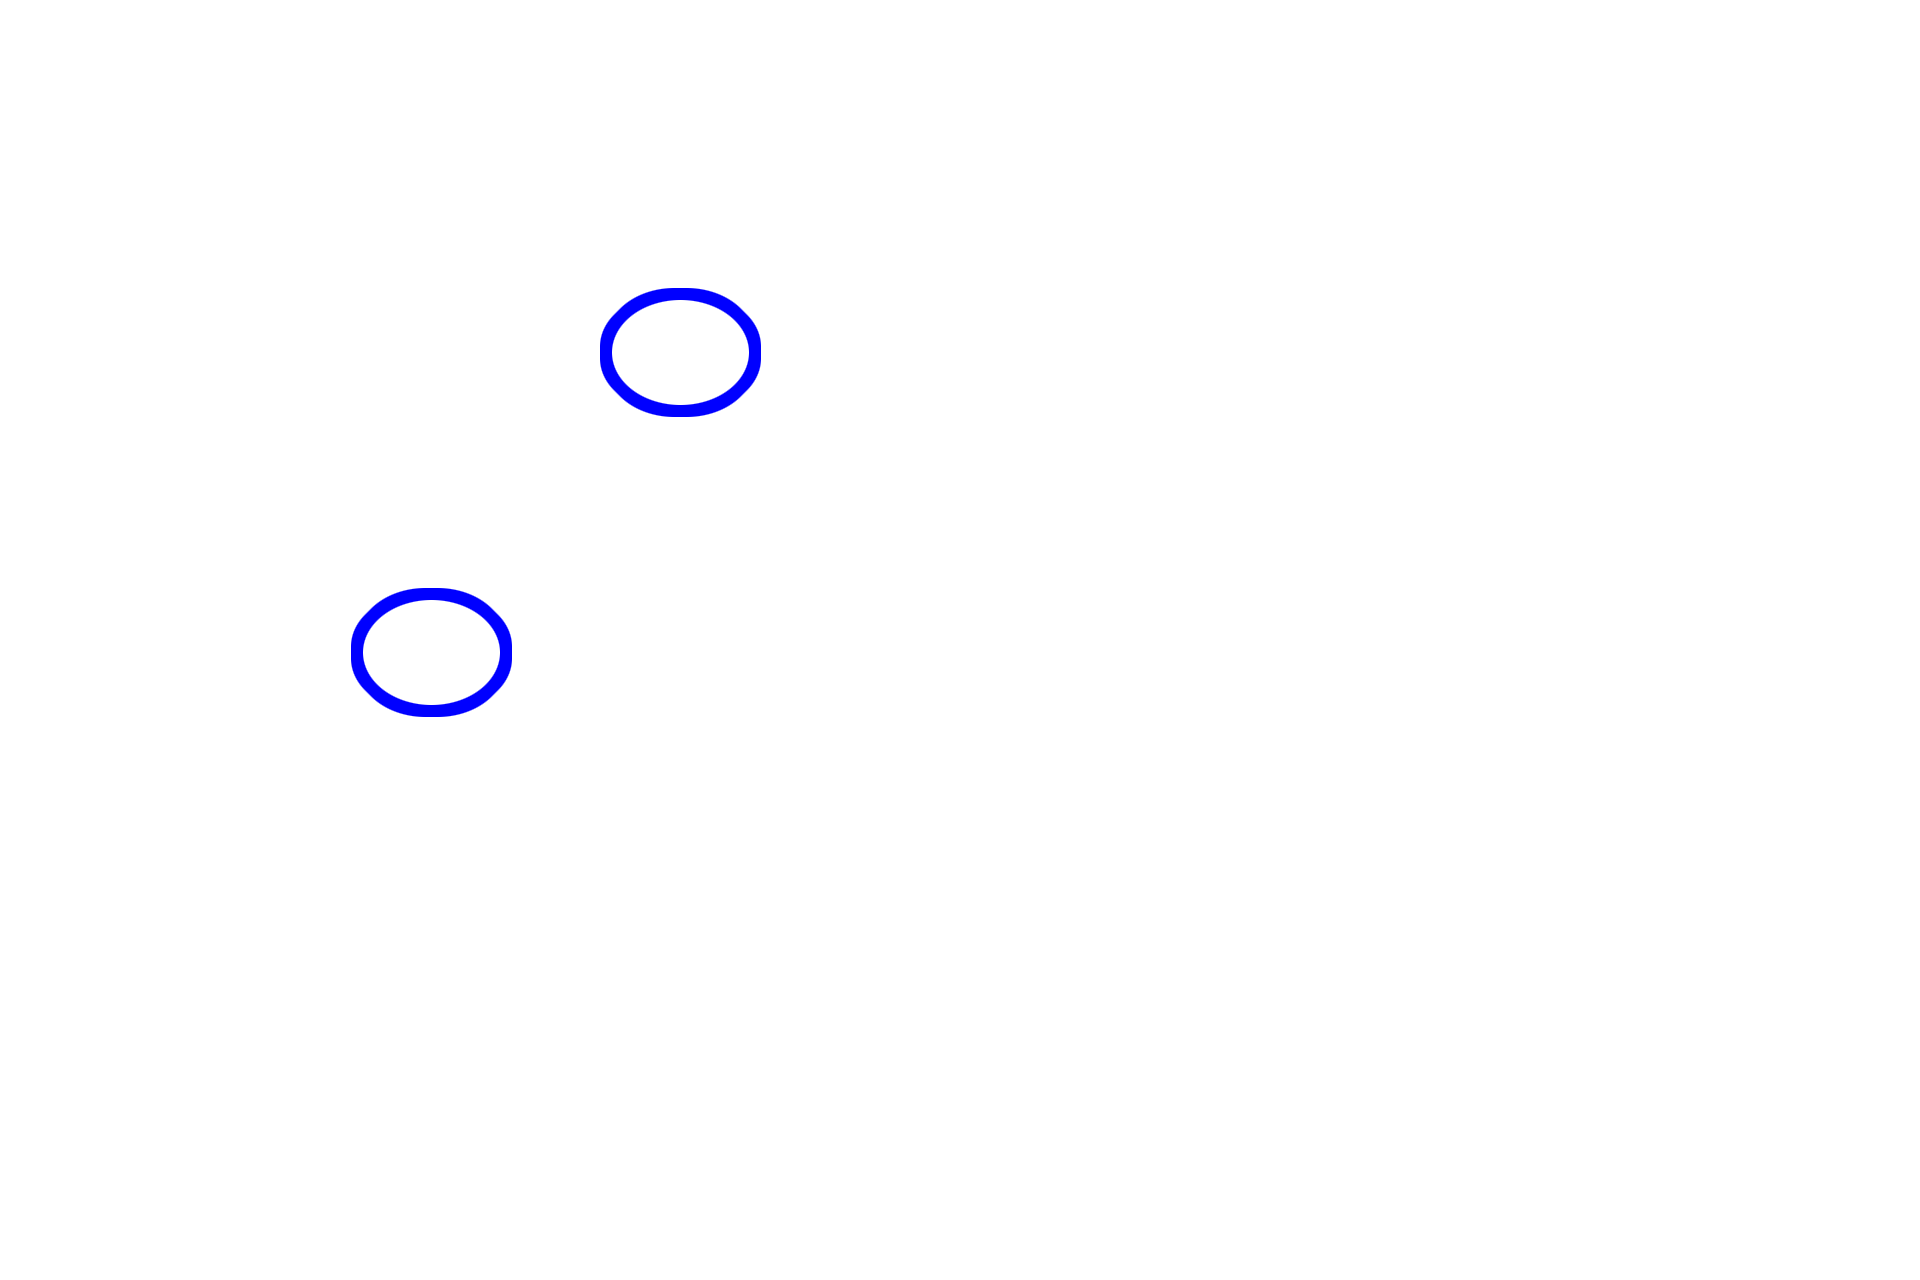 Centrosomes <p>Anaphase begins as chiasmata break, allowing homologous chromosomes to separate.  Unlike mitosis, sister chromatids remain attached by cohesive proteins at their centromeres, and their kinetochores function together.  Anaphase ends with the segregation of one duplicated chromosome of each homologous pair to each spindle pole.</p>
